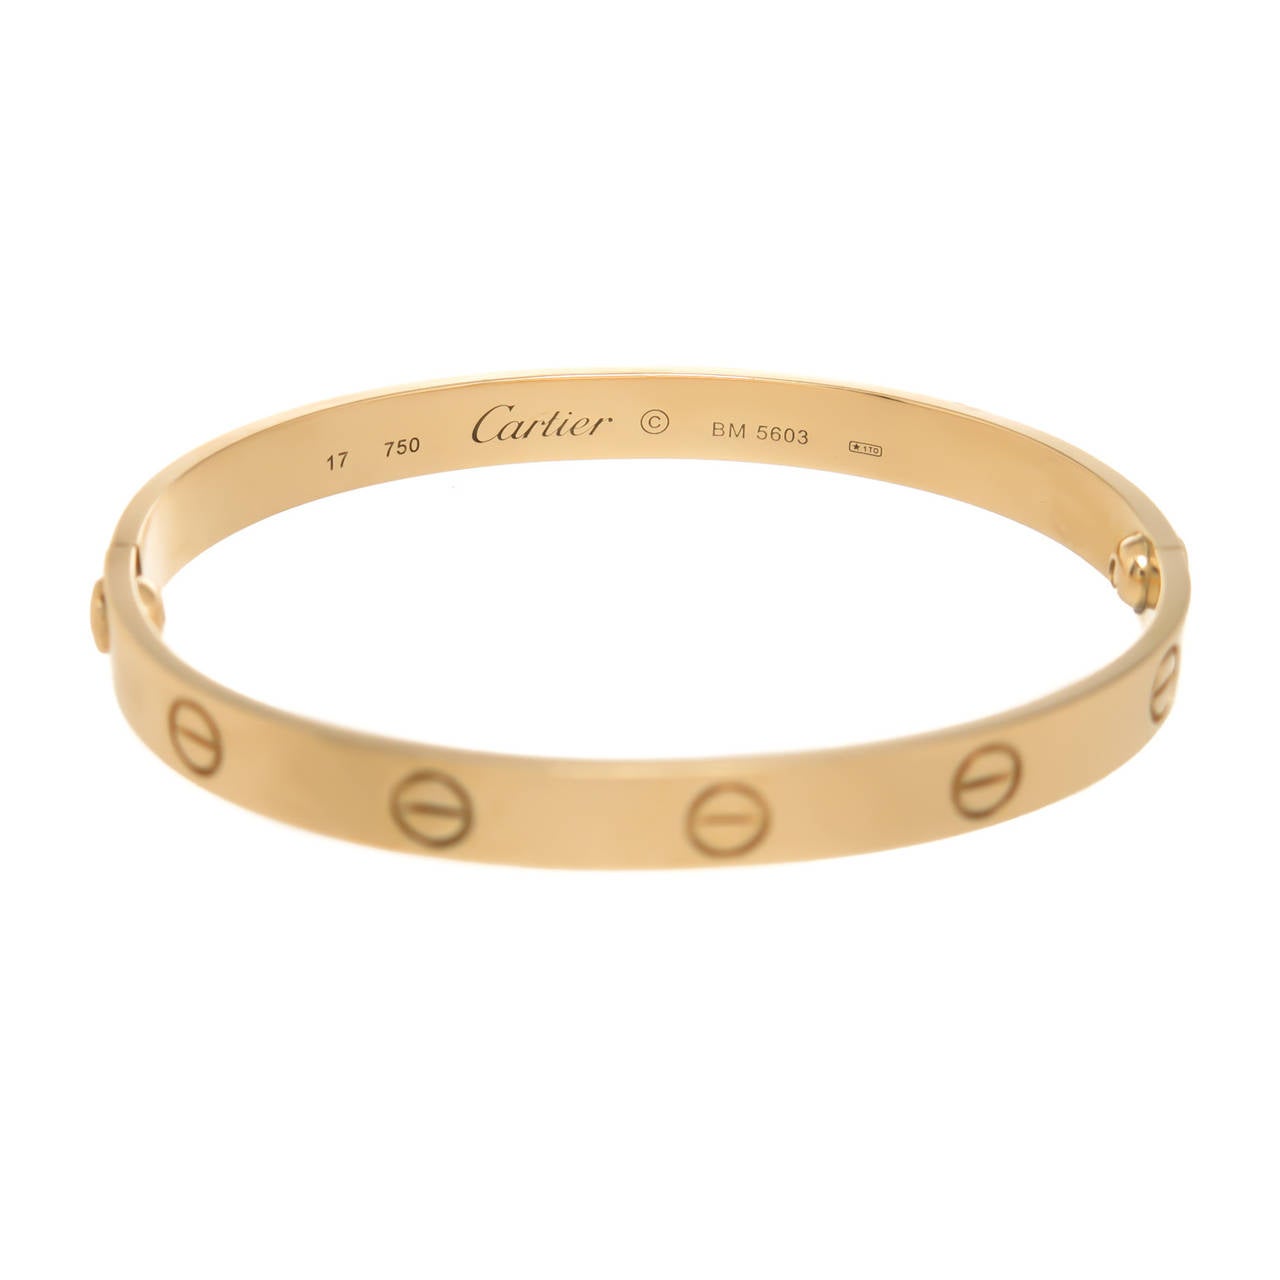 Circa 2005 Cartier Classic 18K Yellow Gold Love Bracelet size 17 and measuring 1/4 inch wide. Comes with Original Screwdriver and Cartier Red Suede Pouch. Signed, Numbered and having French Control stamps.